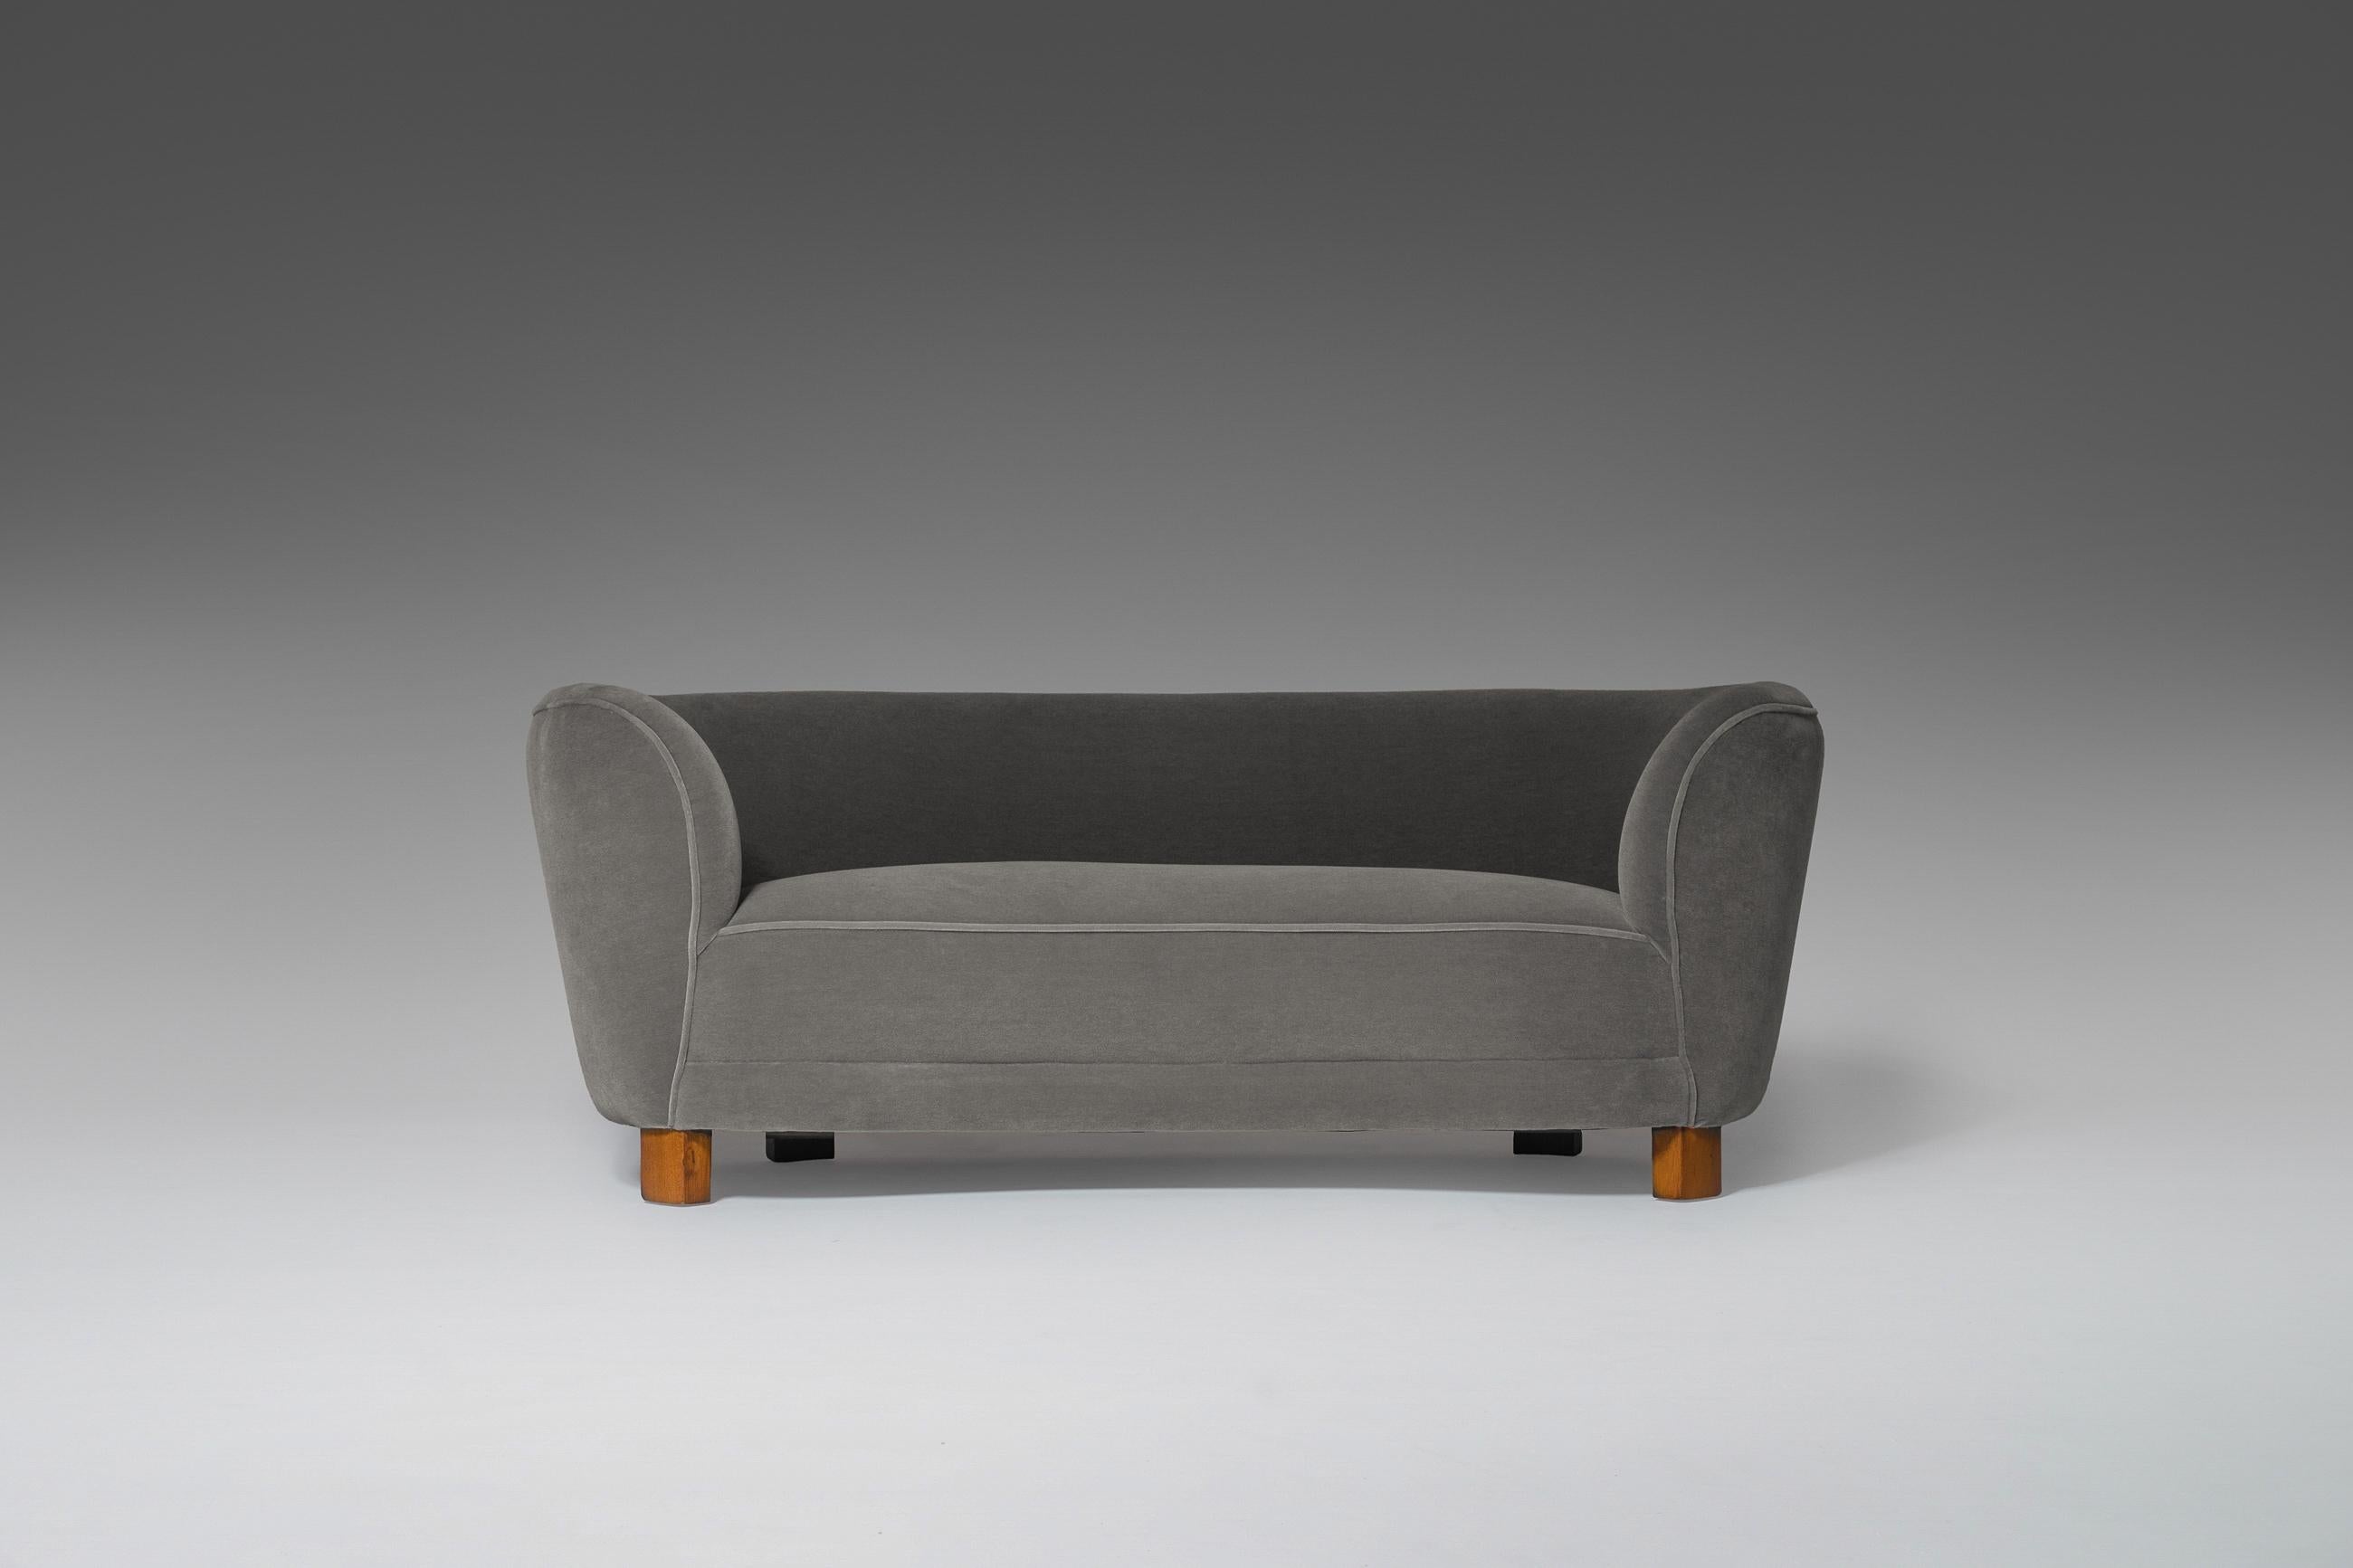 Elegantly curved sofa fabricated in Denmark, 1940s. The sofa is and slightly reshaped and reupholstered in a rich and modern mohair, which make the eccentric round puffy shapes stand out nicely while creating optimal comfort. The solid teak legs are